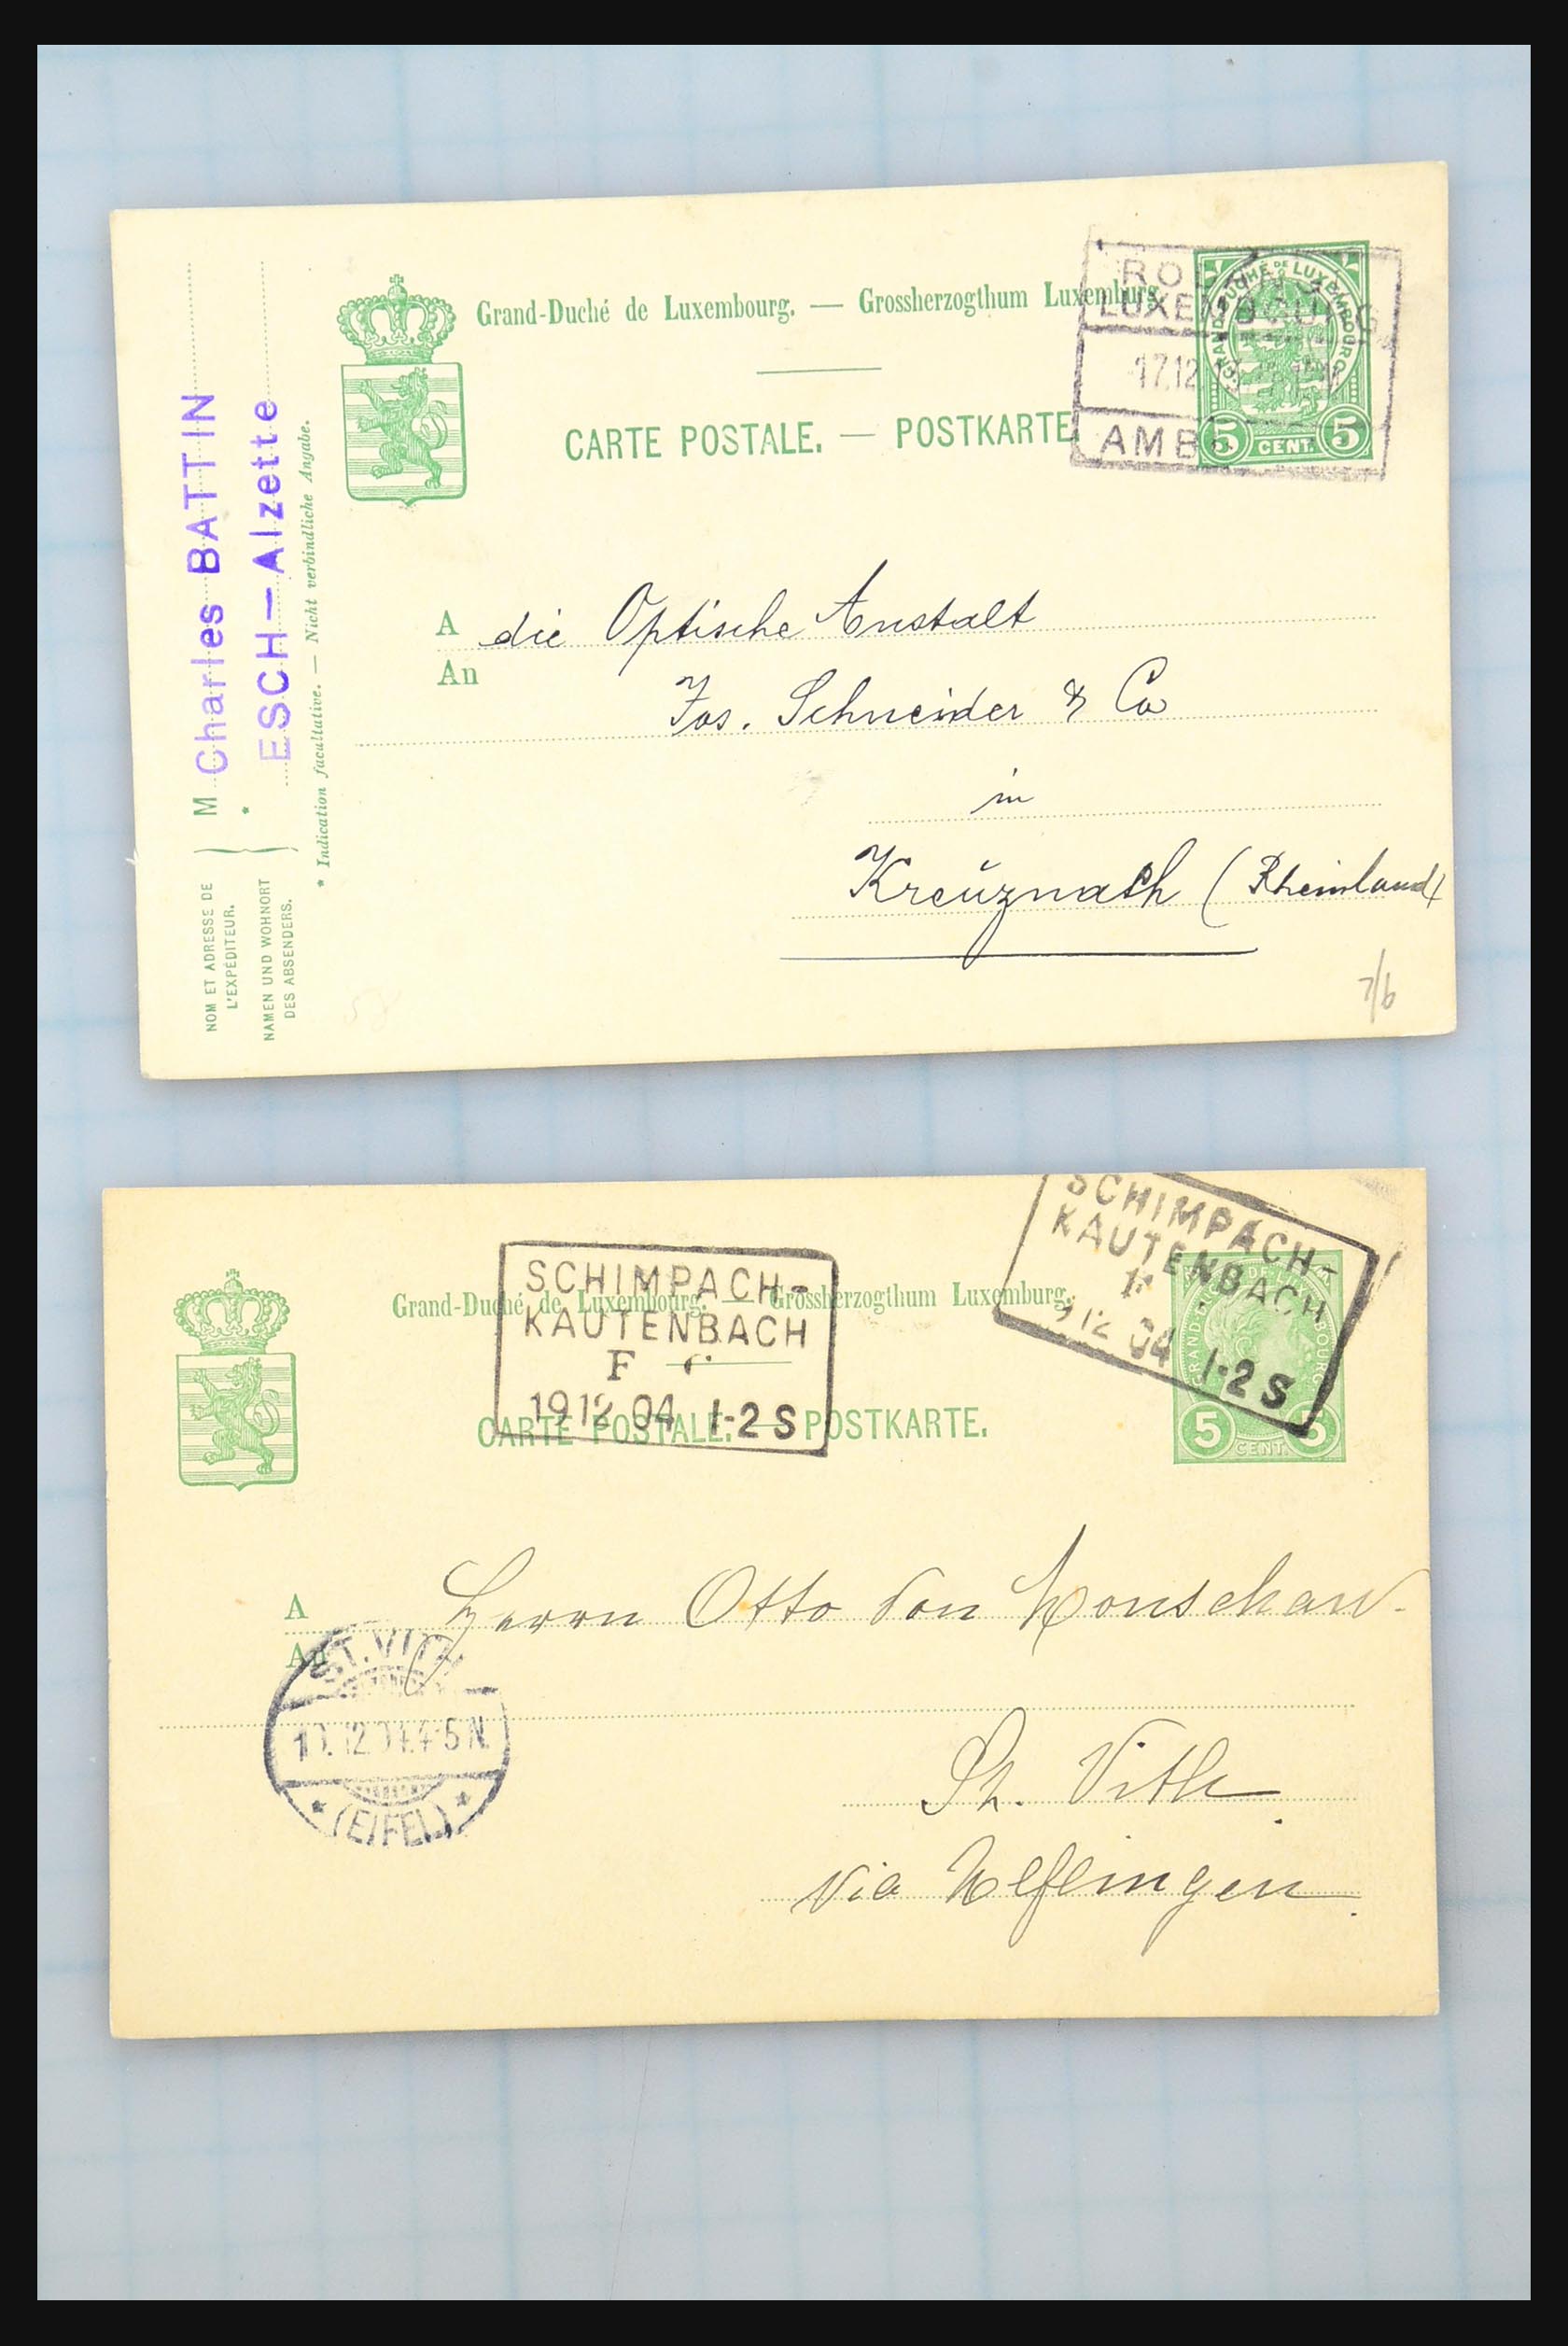 31358 095 - 31358 Portugal/Luxemburg/Greece covers 1880-1960.